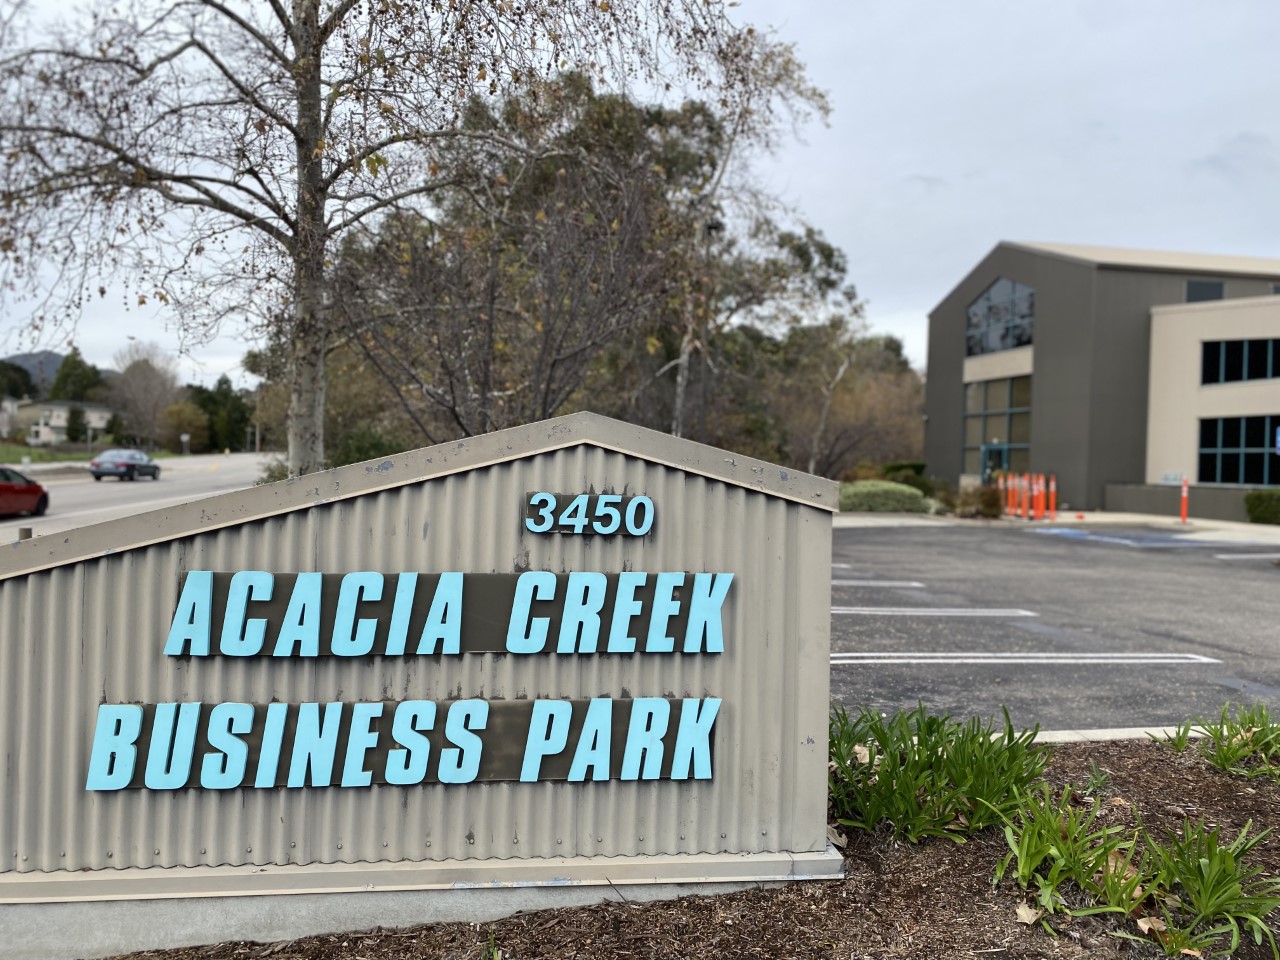 The Acacia Creek Business Park from 3450 Broad Street building with grey and teal metal panels.